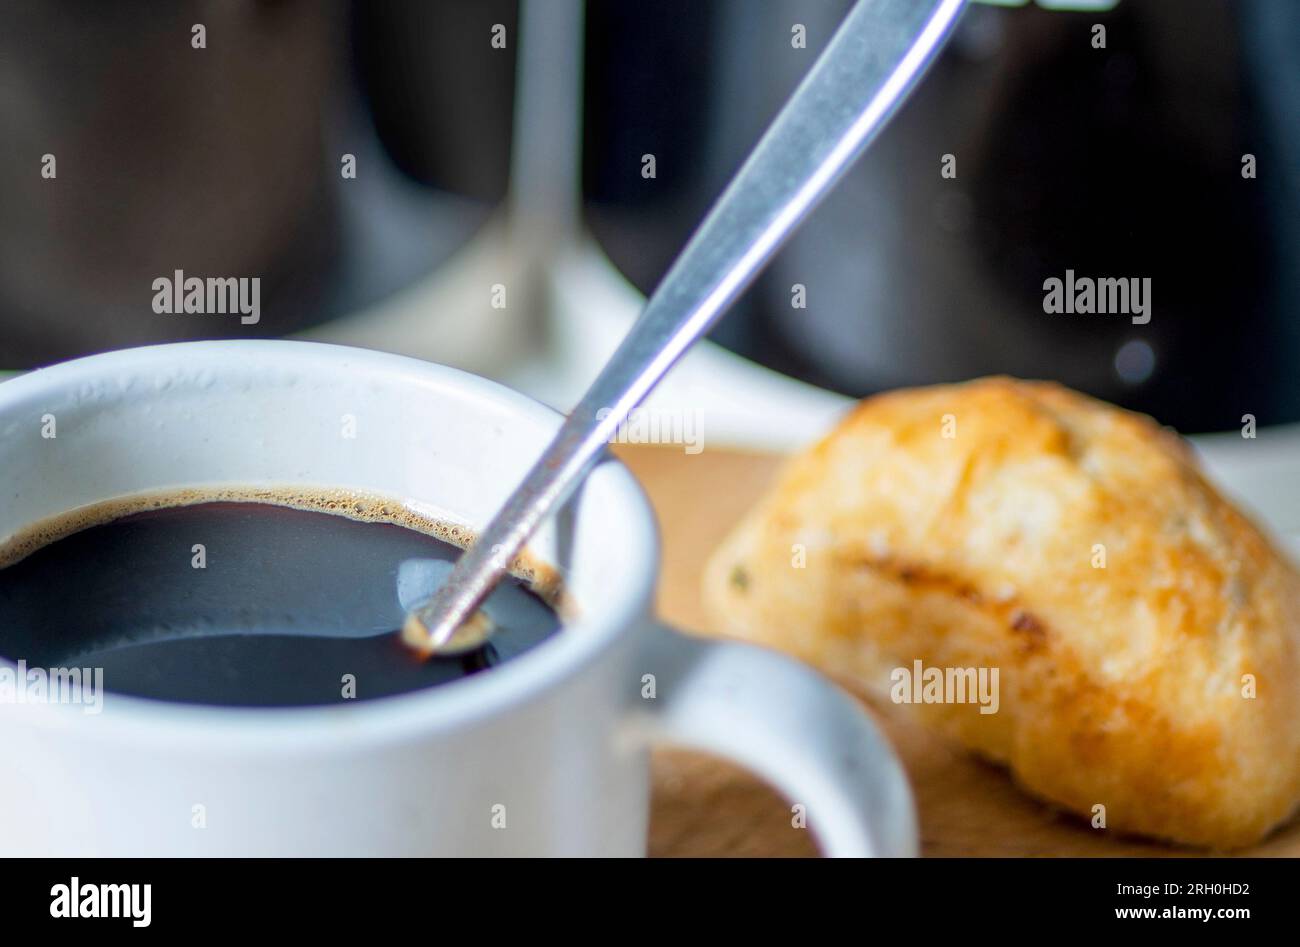 Freshly poured,hot,ready to drink,in an espresso coffee mug and silver spoon used to stir,on a wooden chopping board next to a bread roll,sugar and co Stock Photo